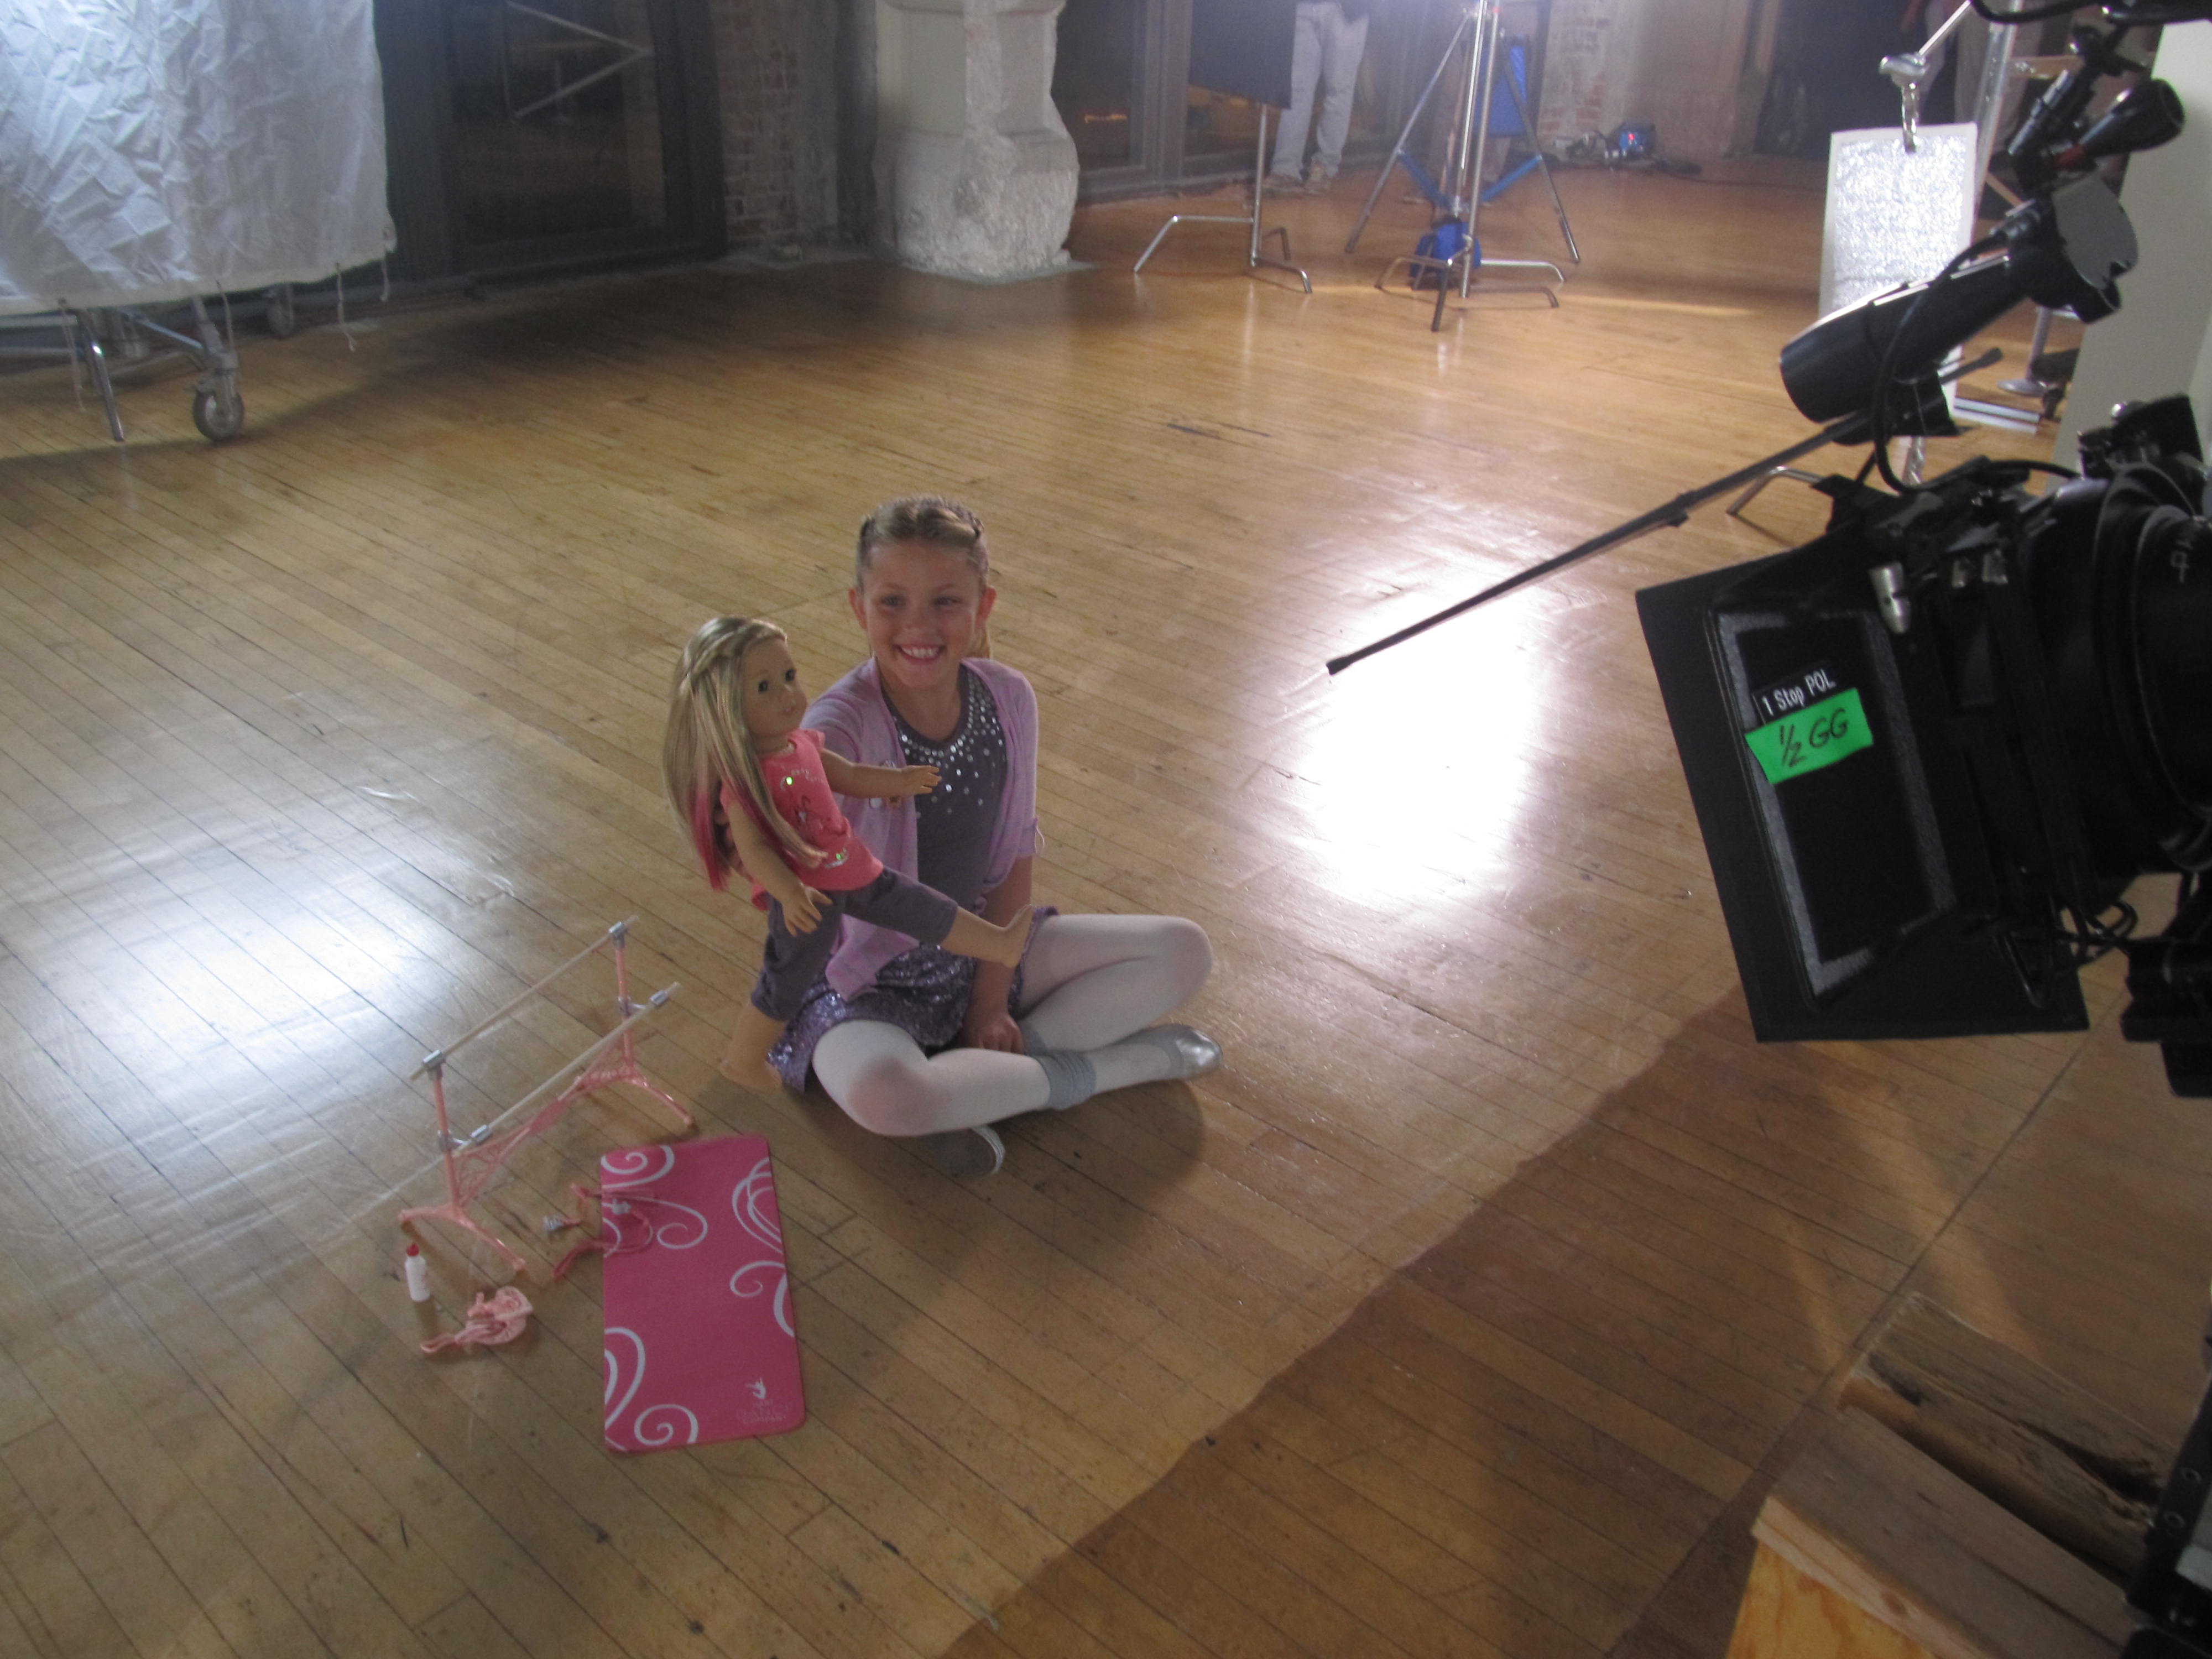 Ryan rehearsing a close-up holding Isabelle at AMERICAN GIRL - Isabelle, Girl of the Year 2014 doll commercial (Dec. 2013).